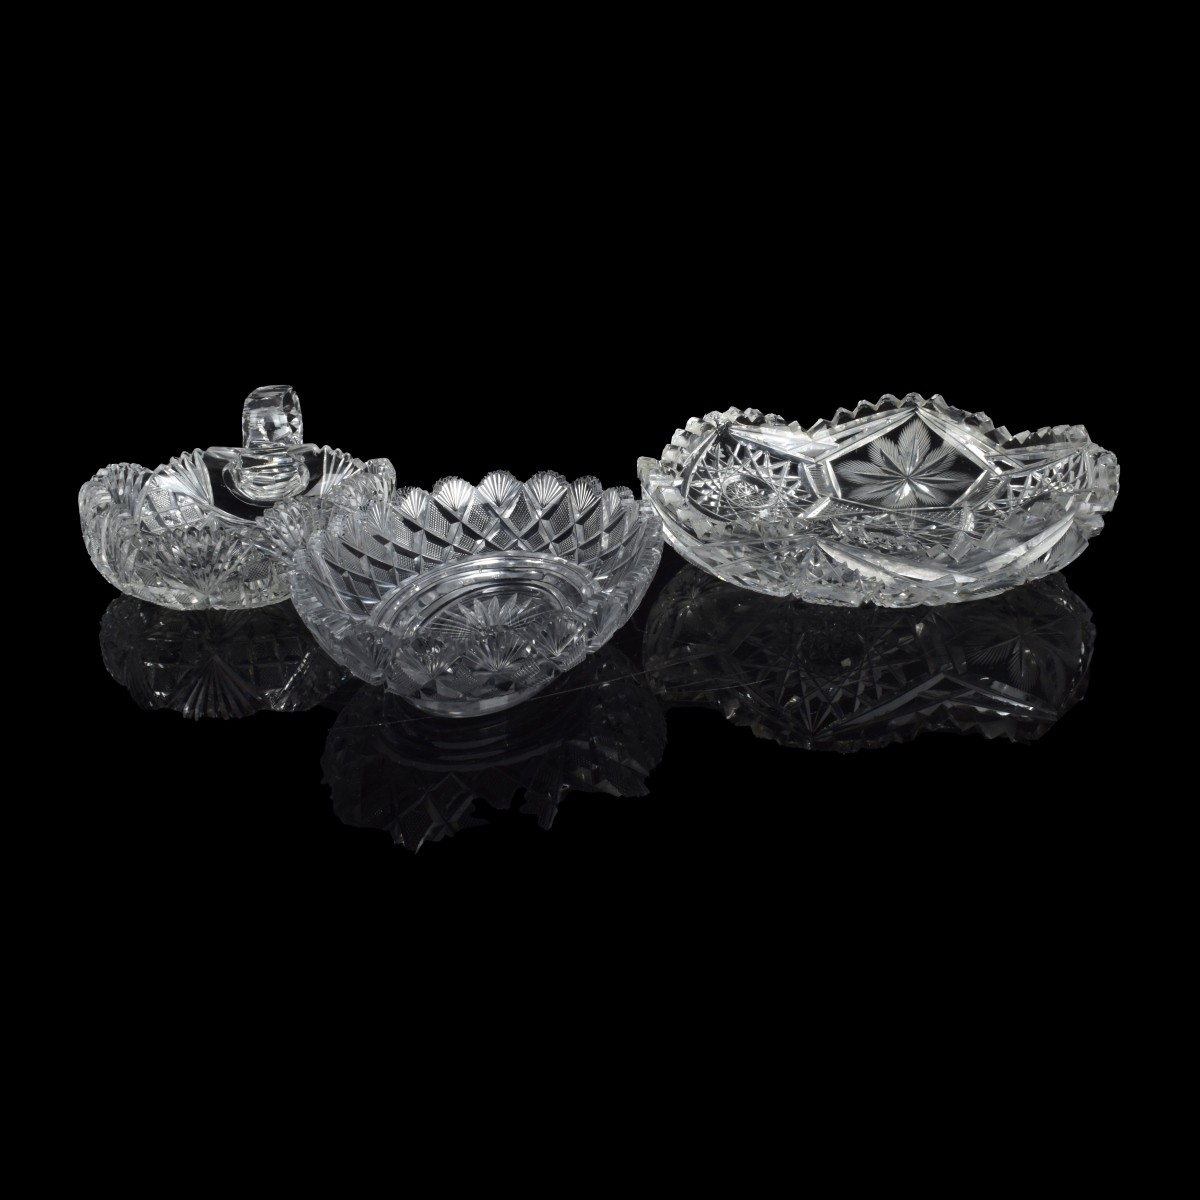 Four Pieces of Cut Crystal Tableware